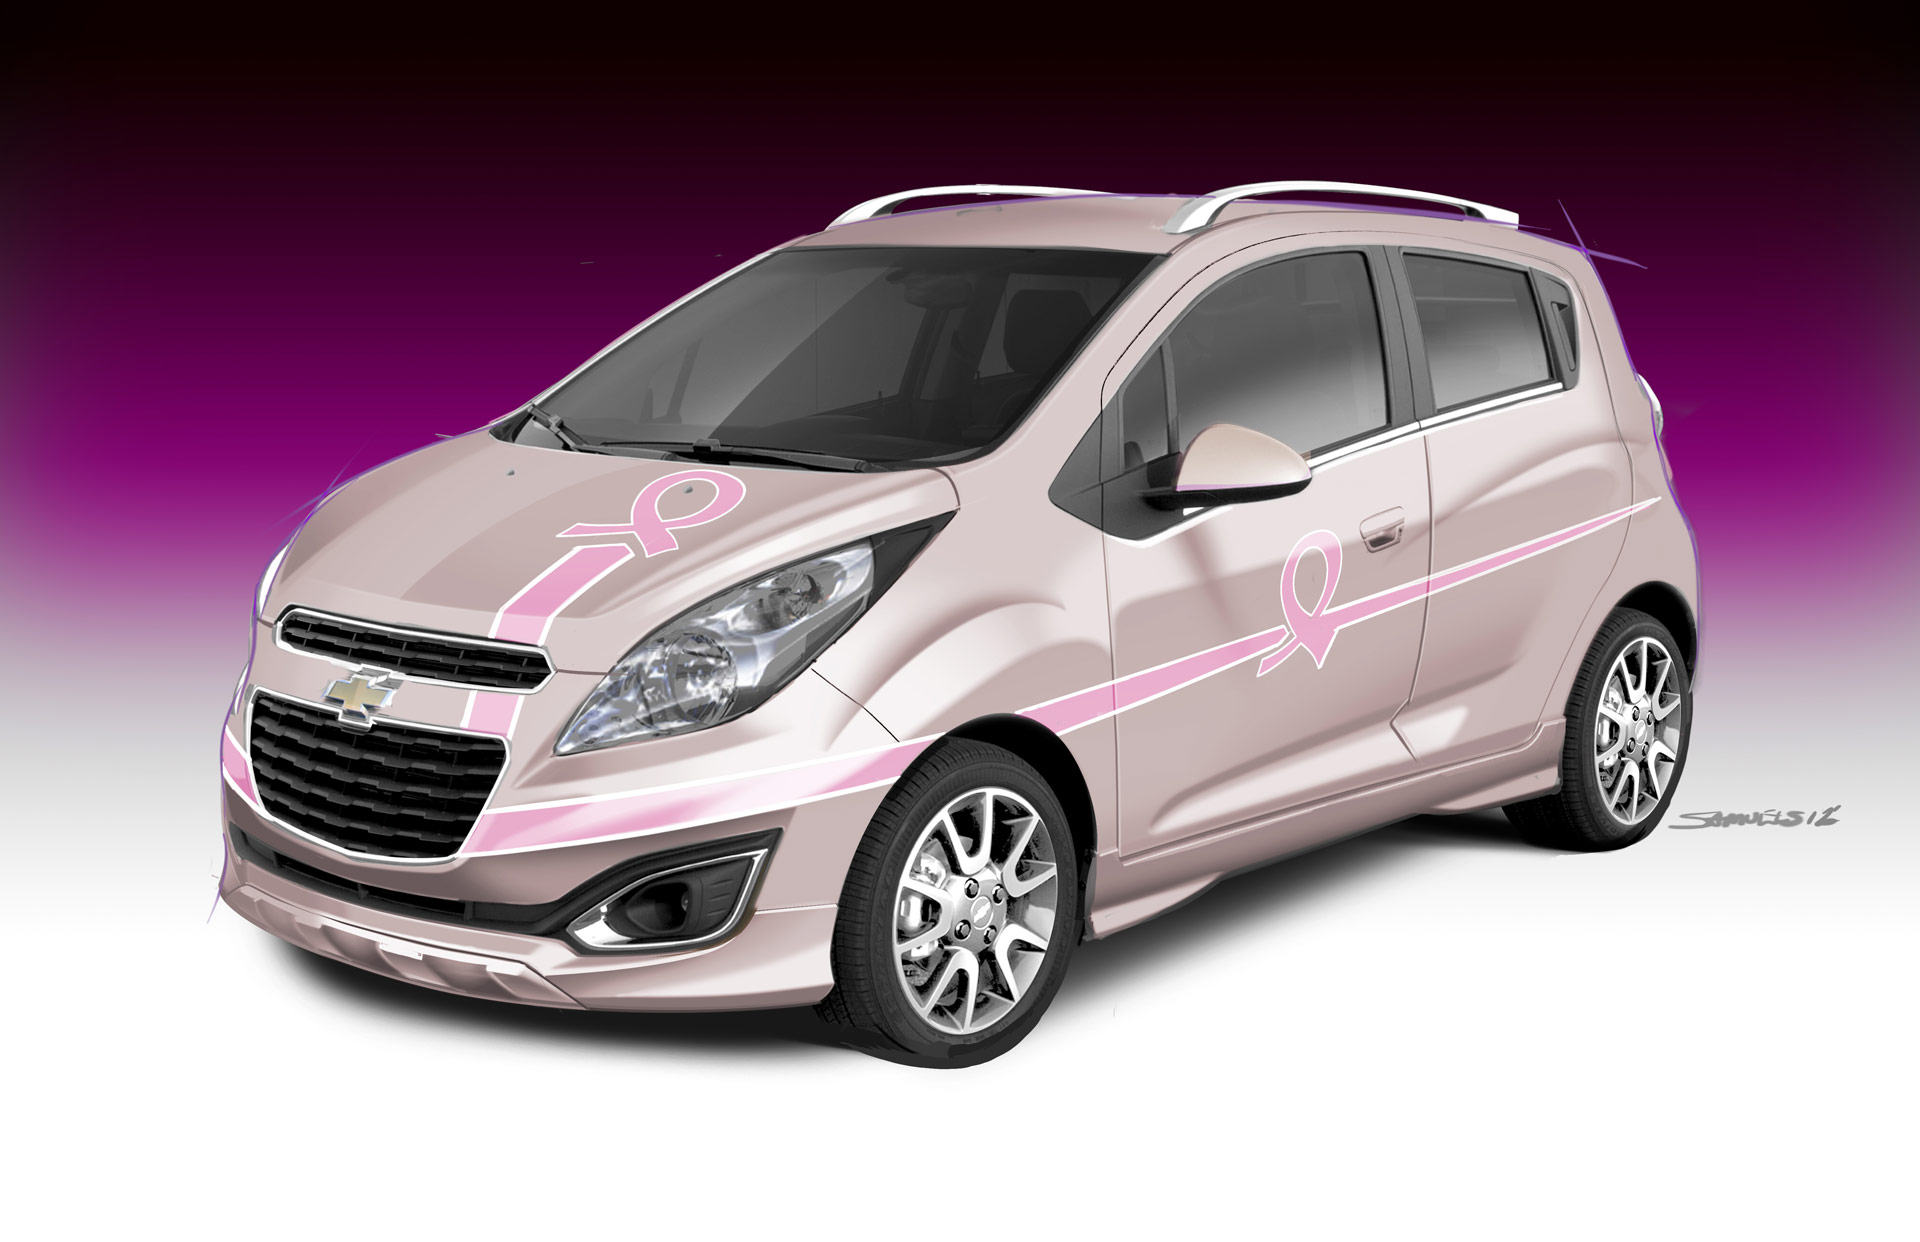 Chevy spark 2013 pink